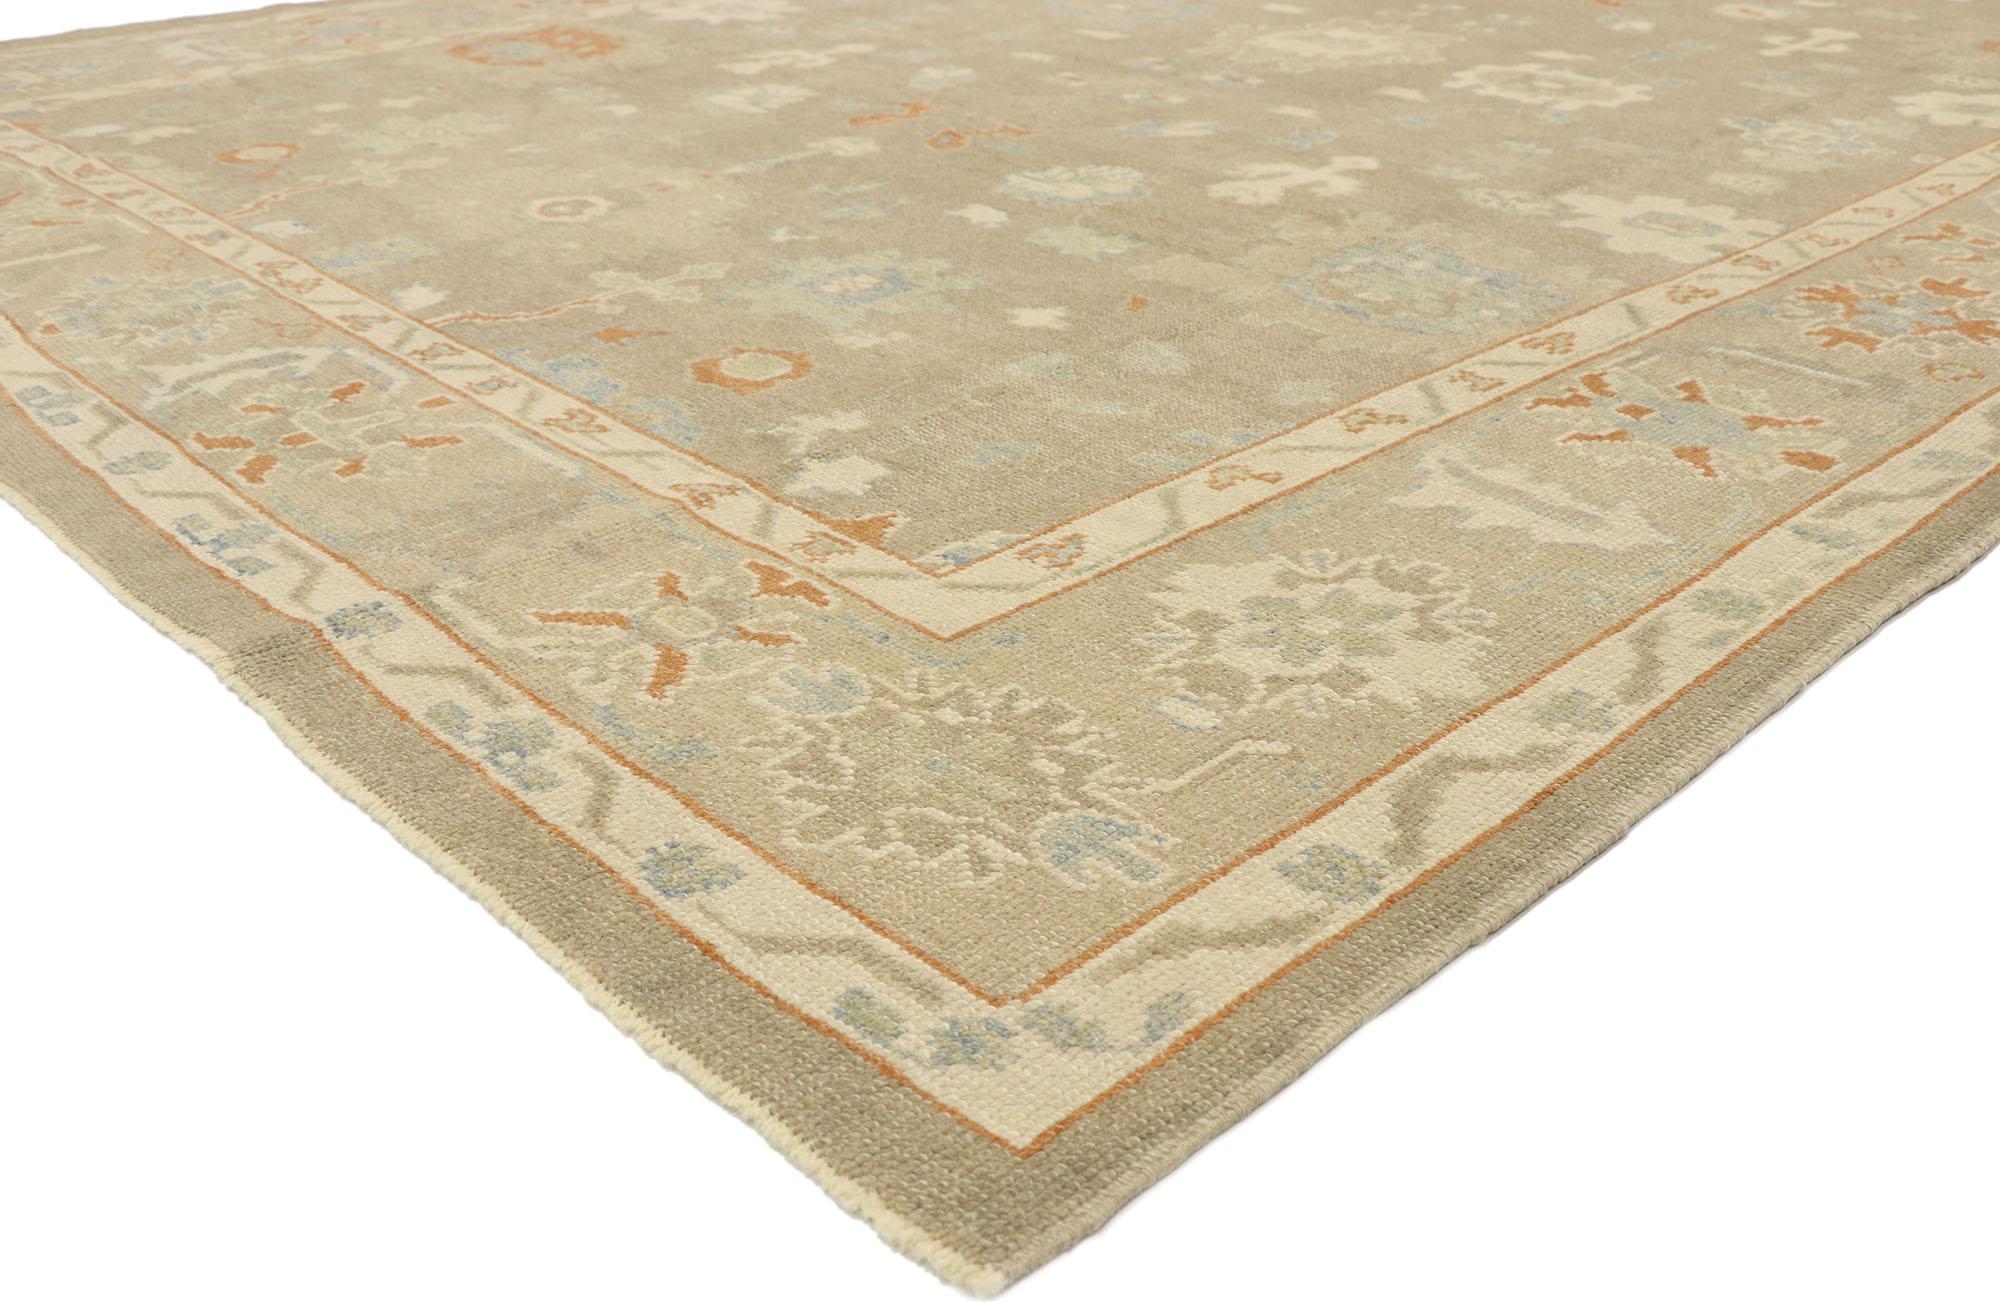 52943, new Contemporary Turkish Oushak rug with modern transitional style 09'00 x 12'06. Blending elements from the modern world with neutral colors, this hand knotted wool contemporary Turkish Oushak rug will boost the coziness factor in nearly any